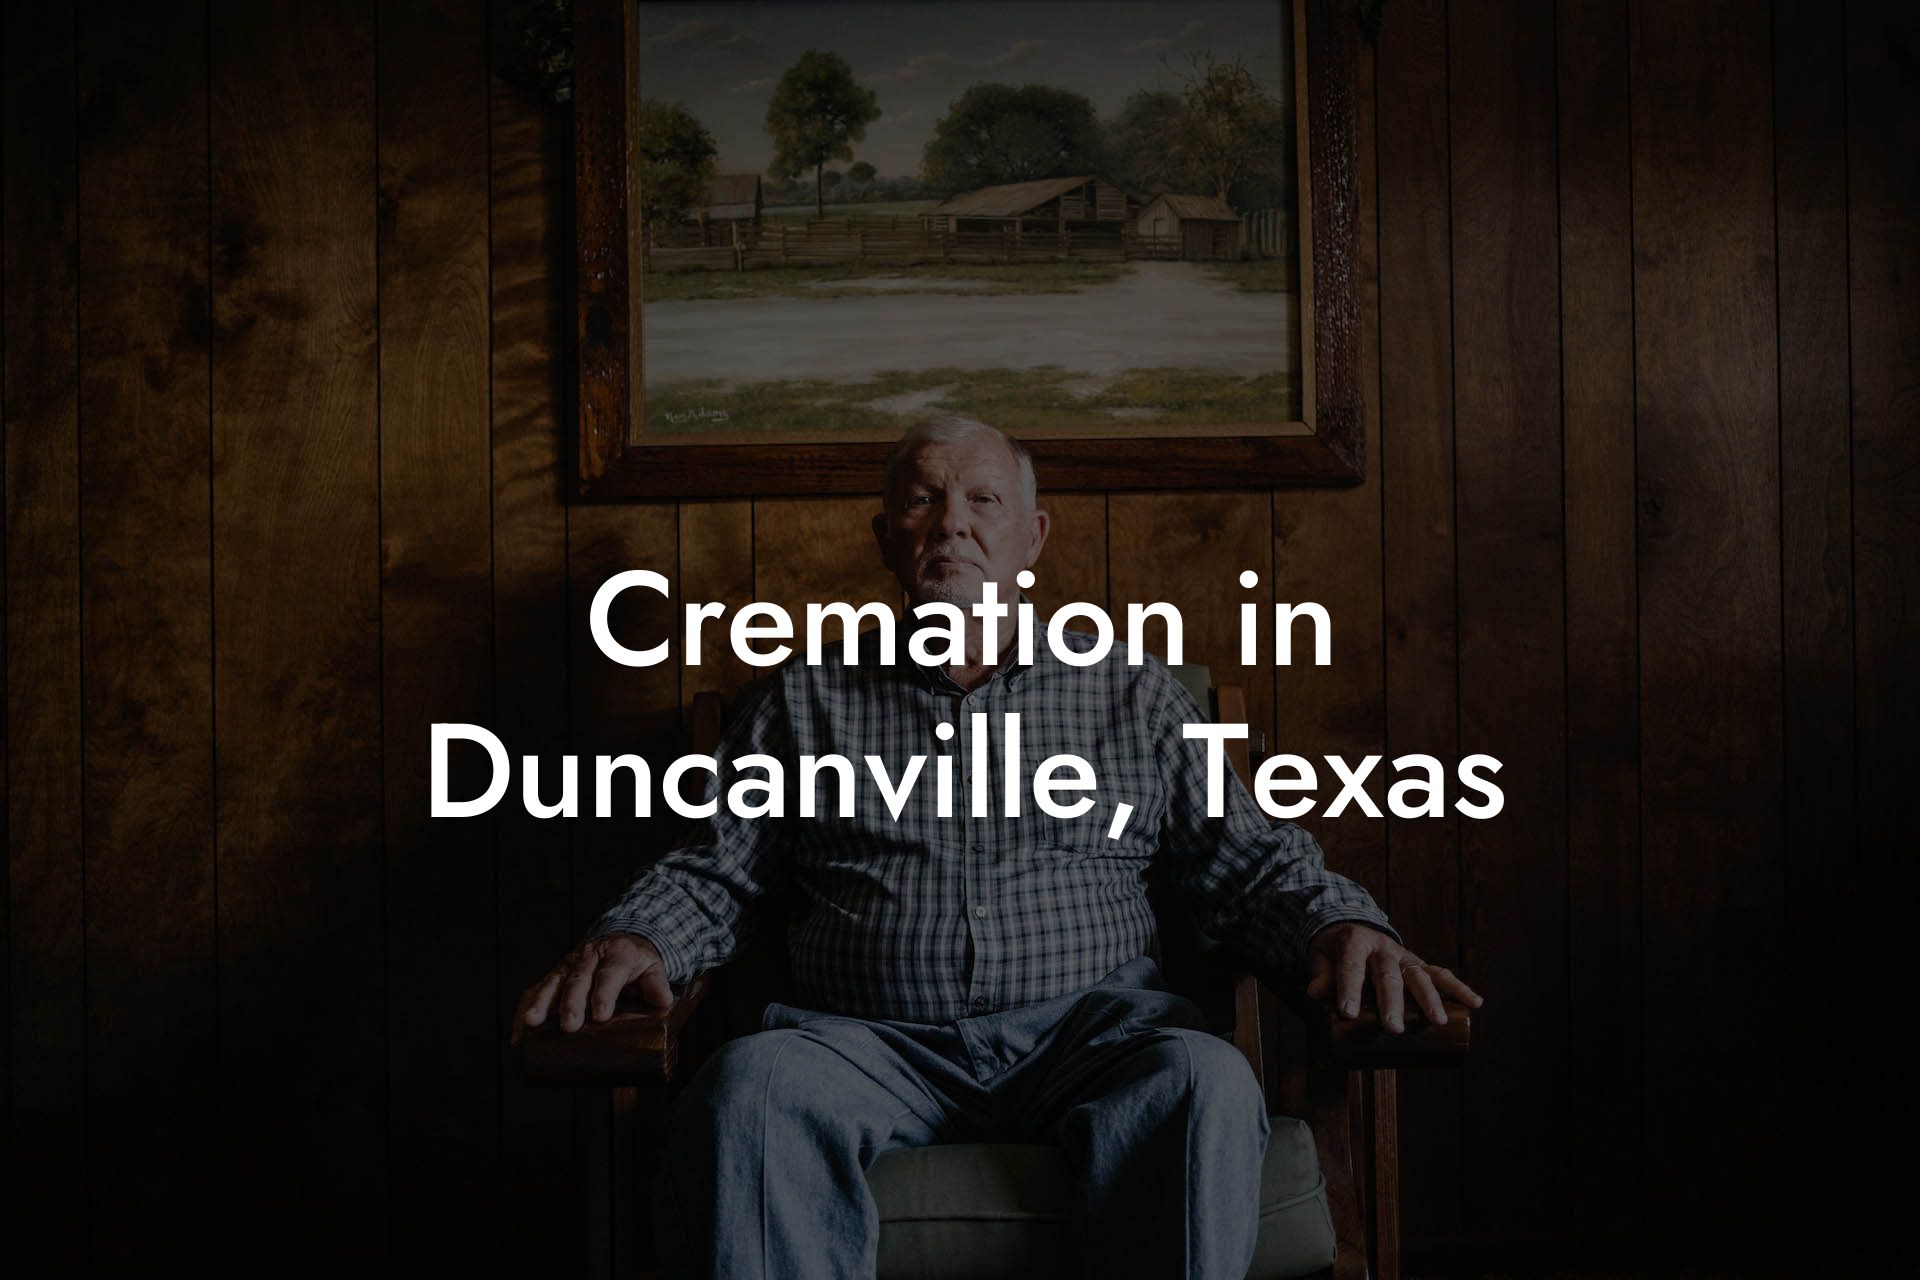 Cremation in Duncanville, Texas